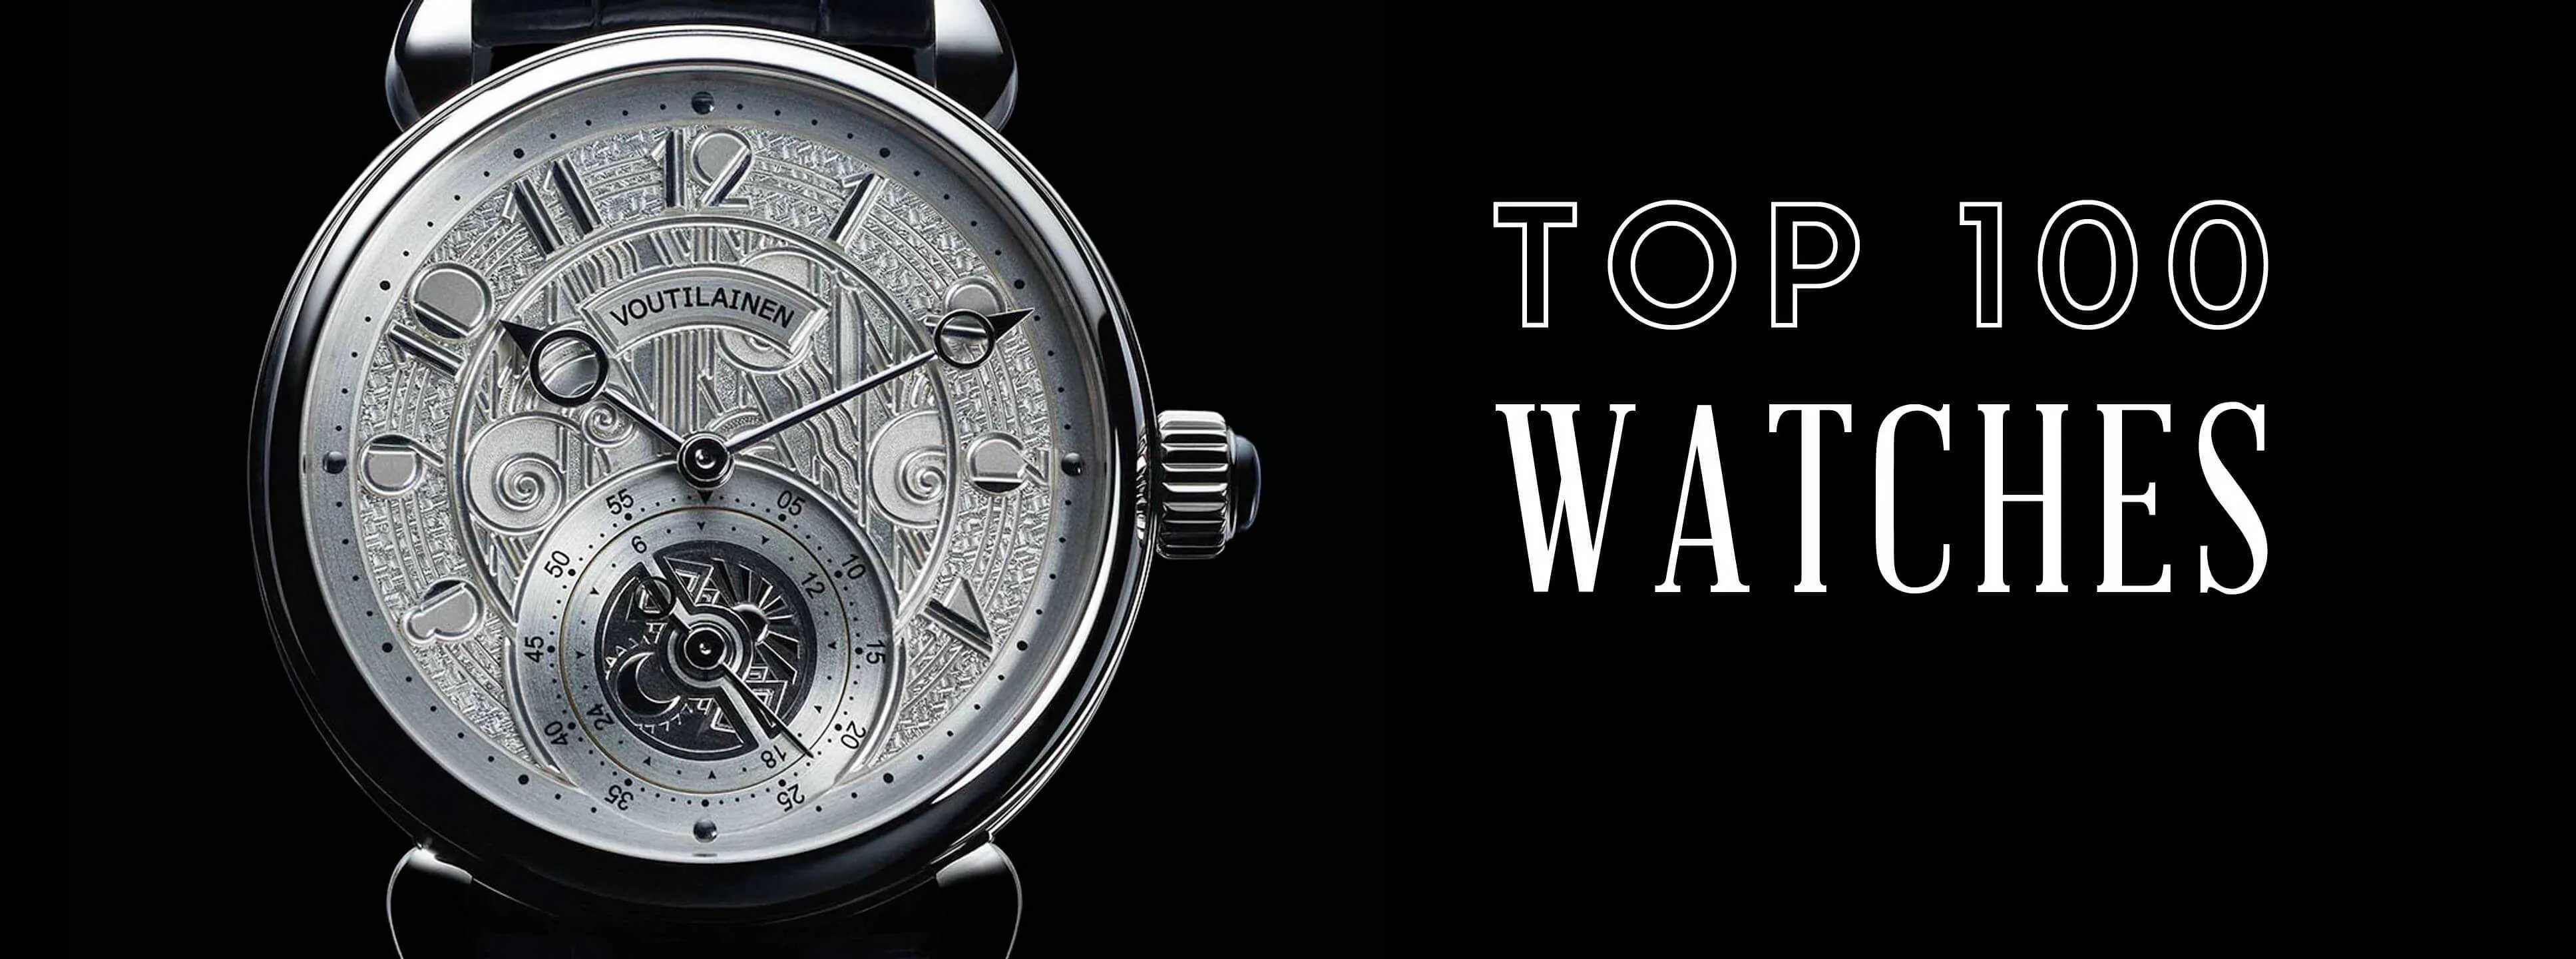 Top 100 Watches For Men